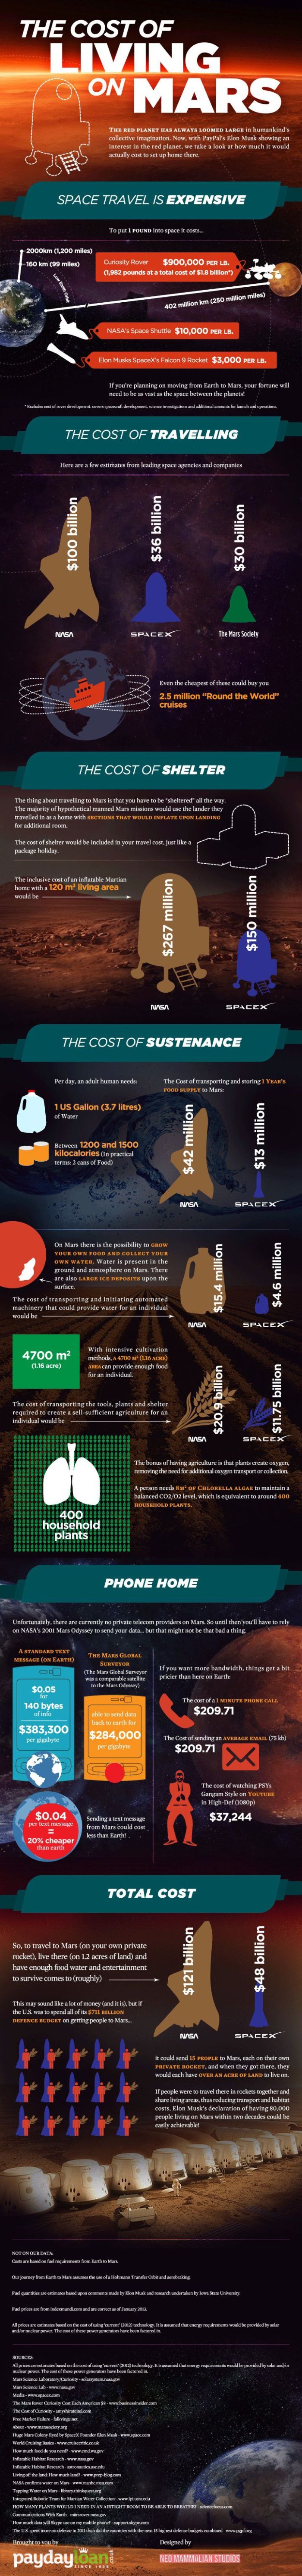 What It Would Actually Cost to Live on Mars (infographic)